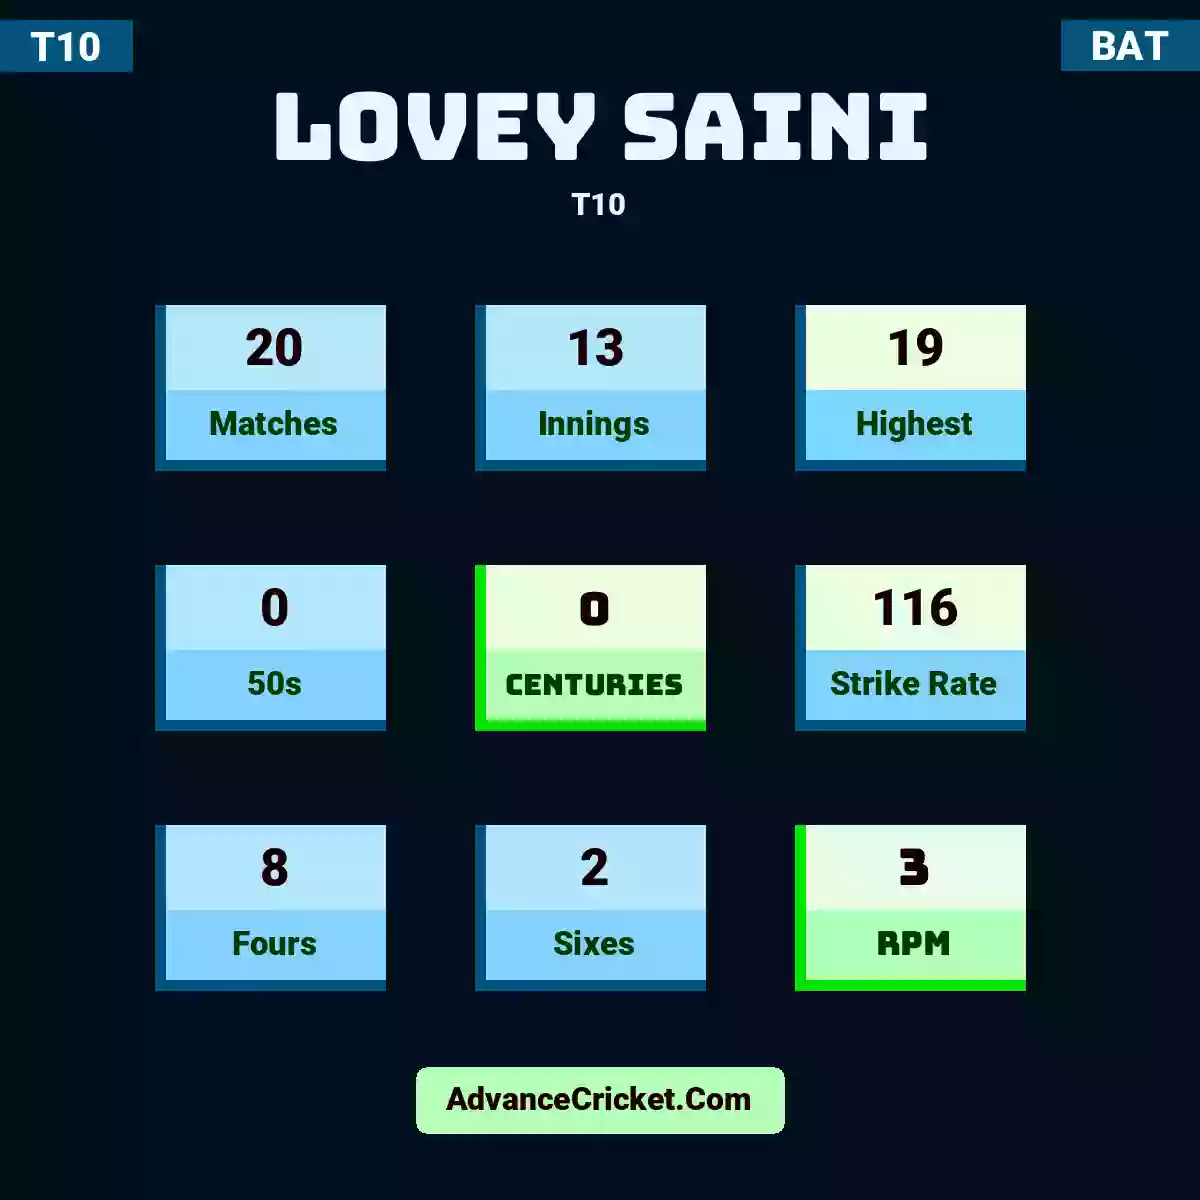 Lovey Saini T10 , Lovey Saini played 20 matches, scored 19 runs as highest, 0 half-centuries, and 0 centuries, with a strike rate of 116. L.Saini hit 8 fours and 2 sixes, with an RPM of 3.